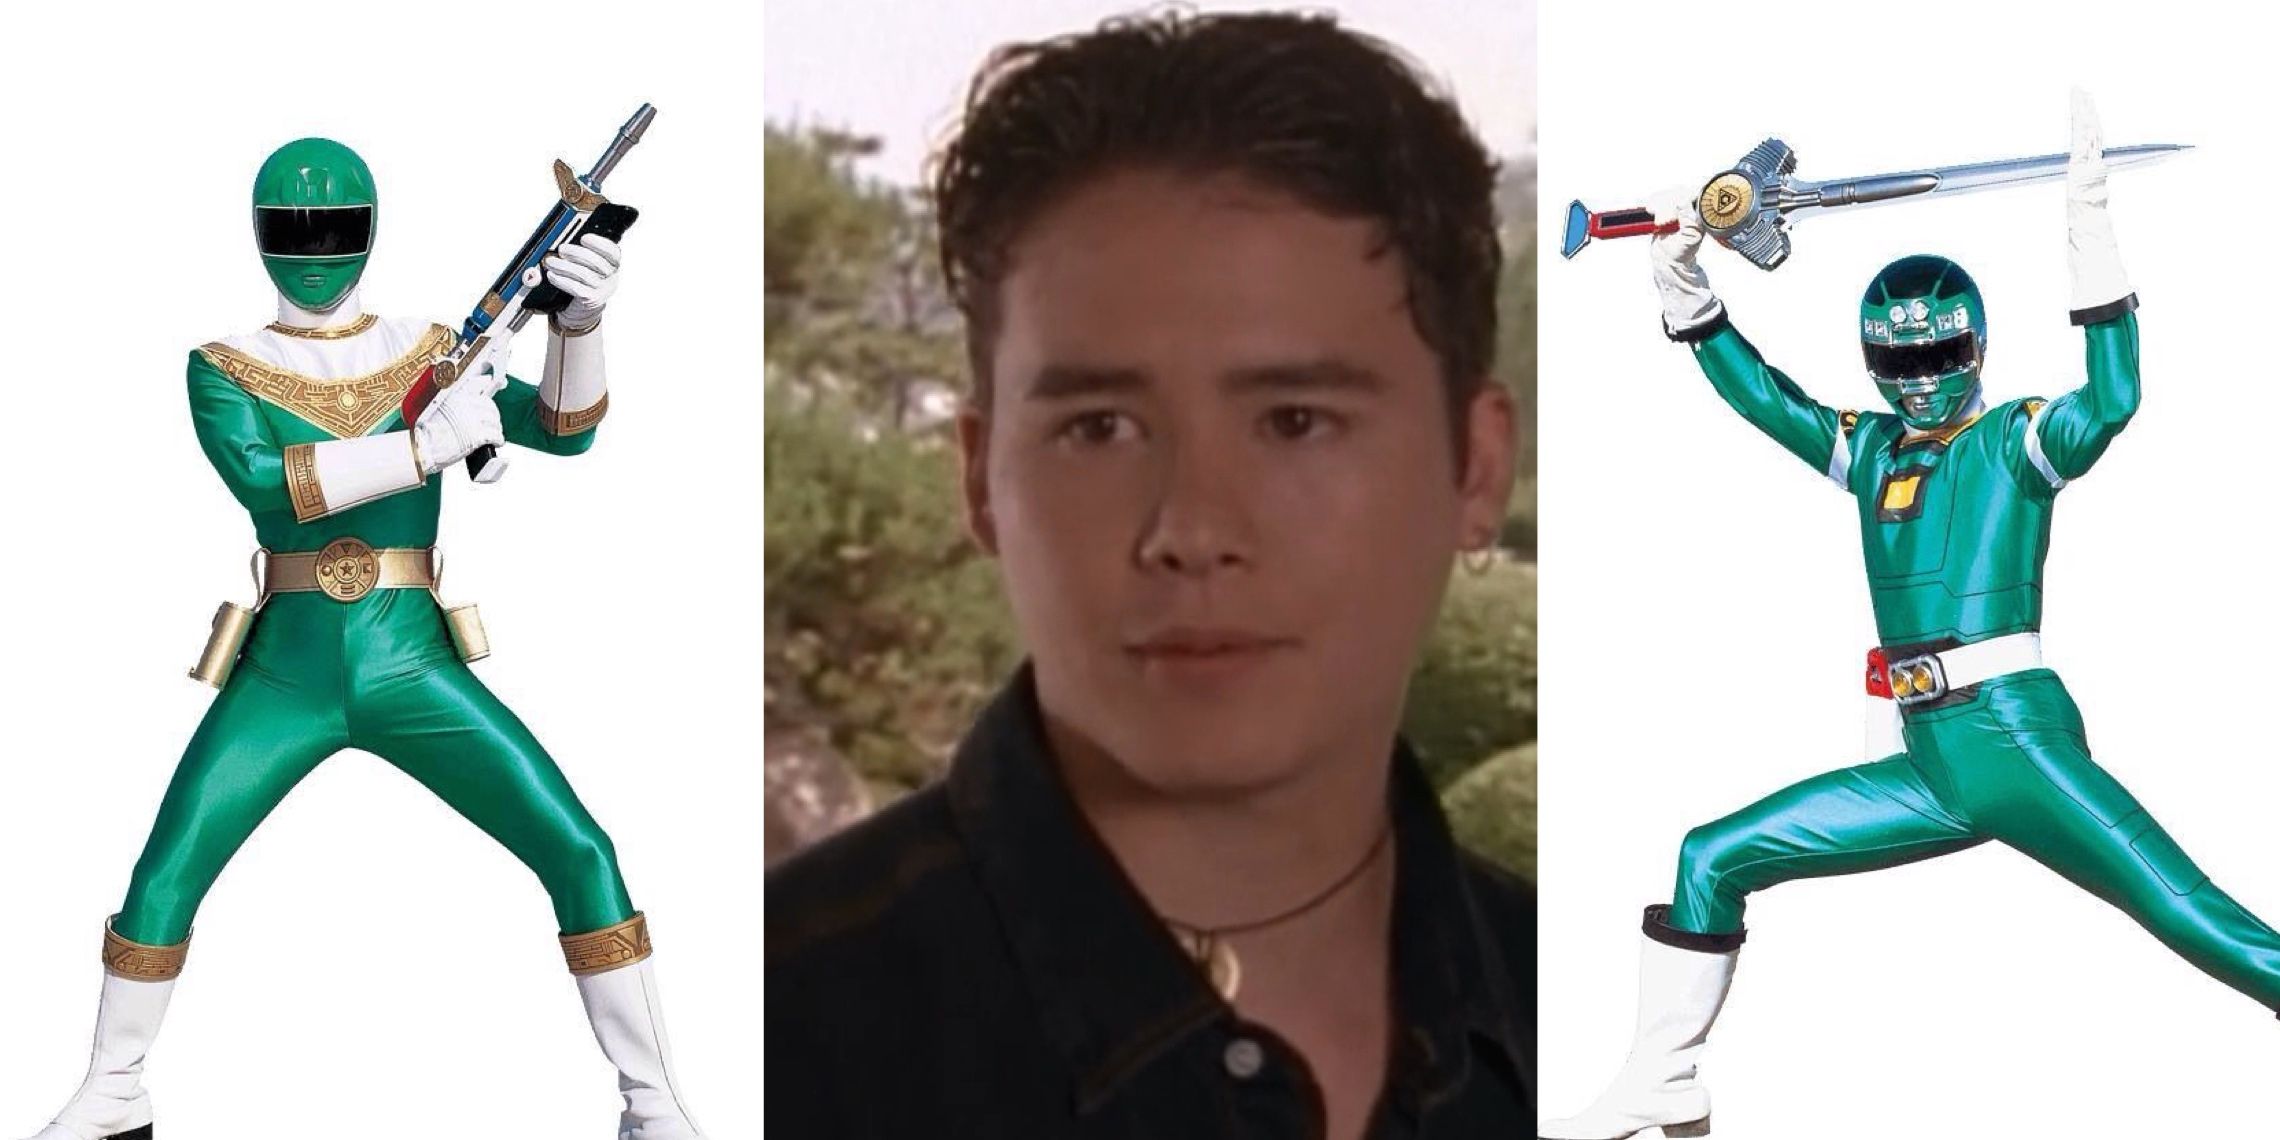 A split image of Adam Park as the Green Ranger in Power Rangers Zeo and Turbo